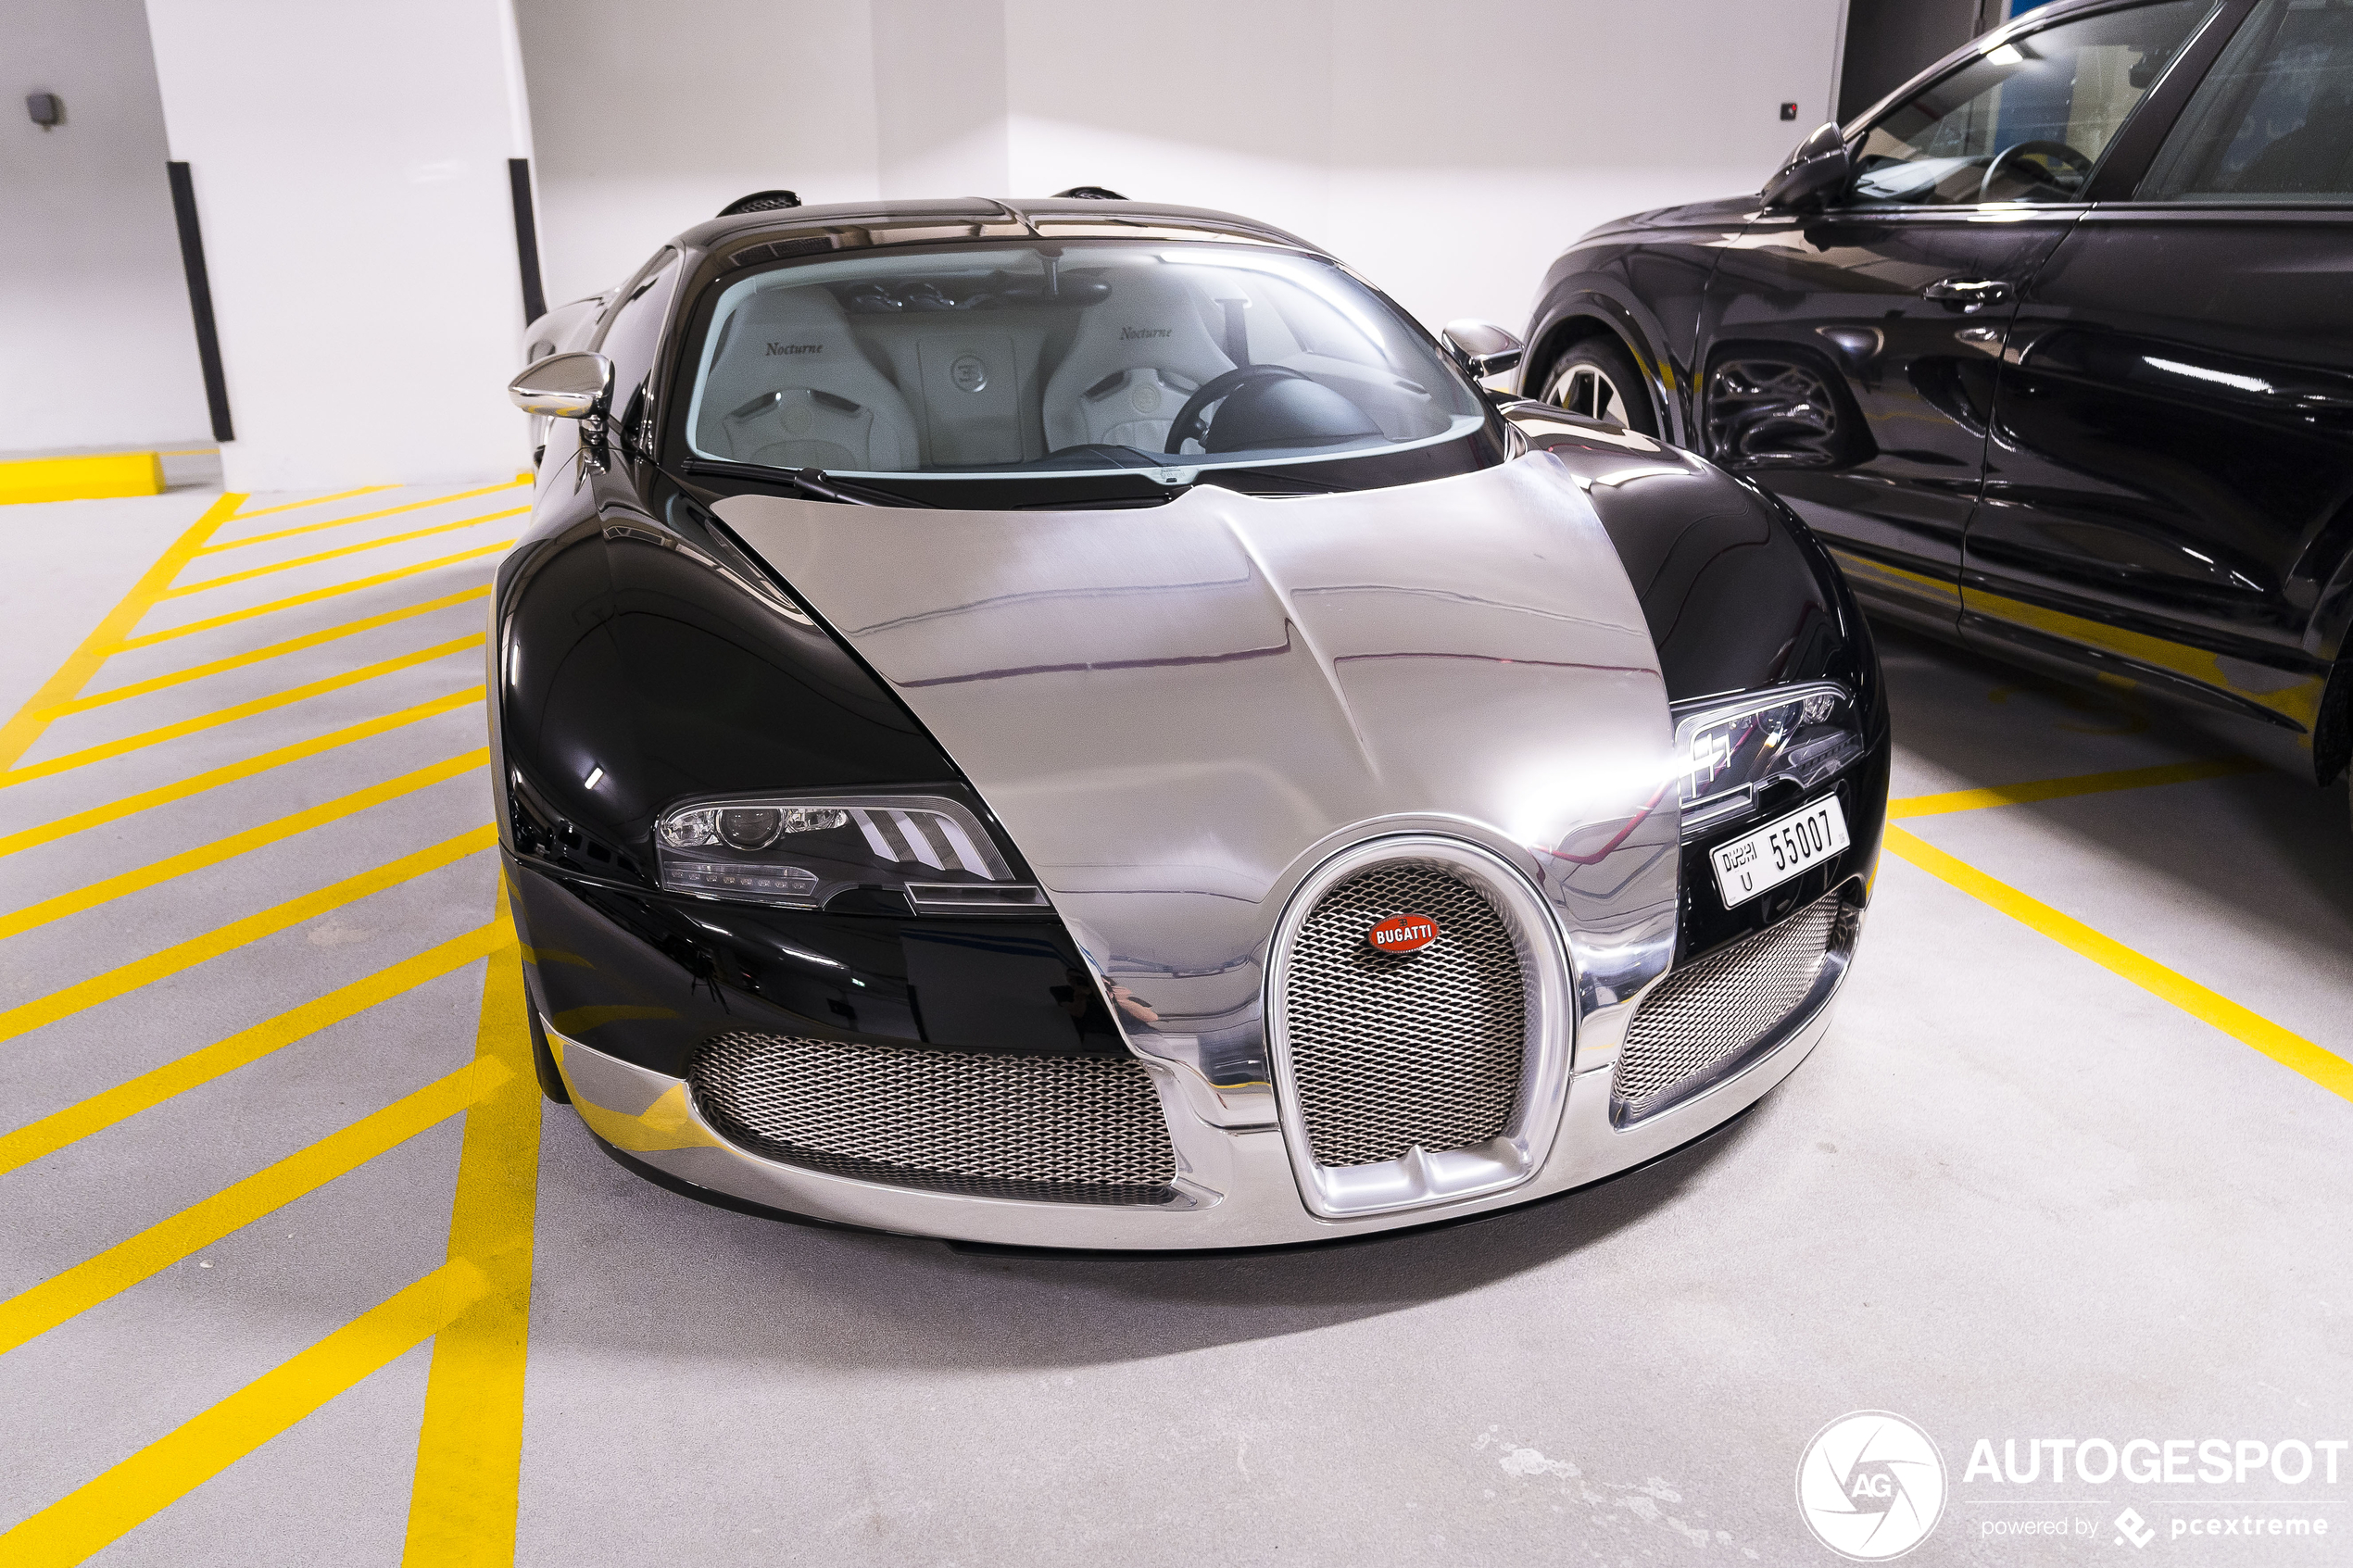 This Bugatti Veyron Nocturne is a first